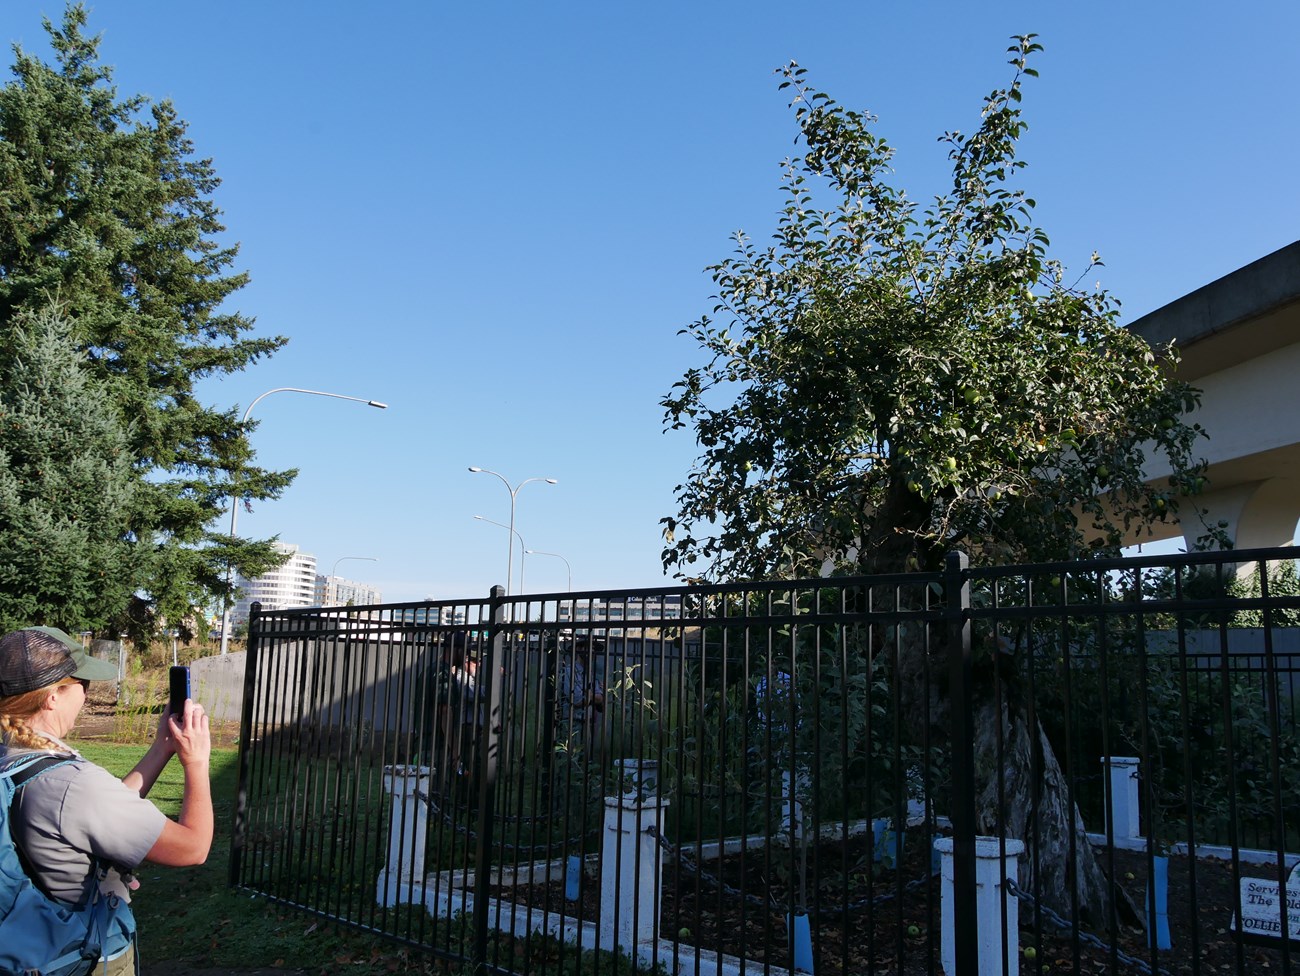 A person uses a cell phone to take a picture of the Old Apple Tree, surrounded by a metal fence and backed by an elevated highway